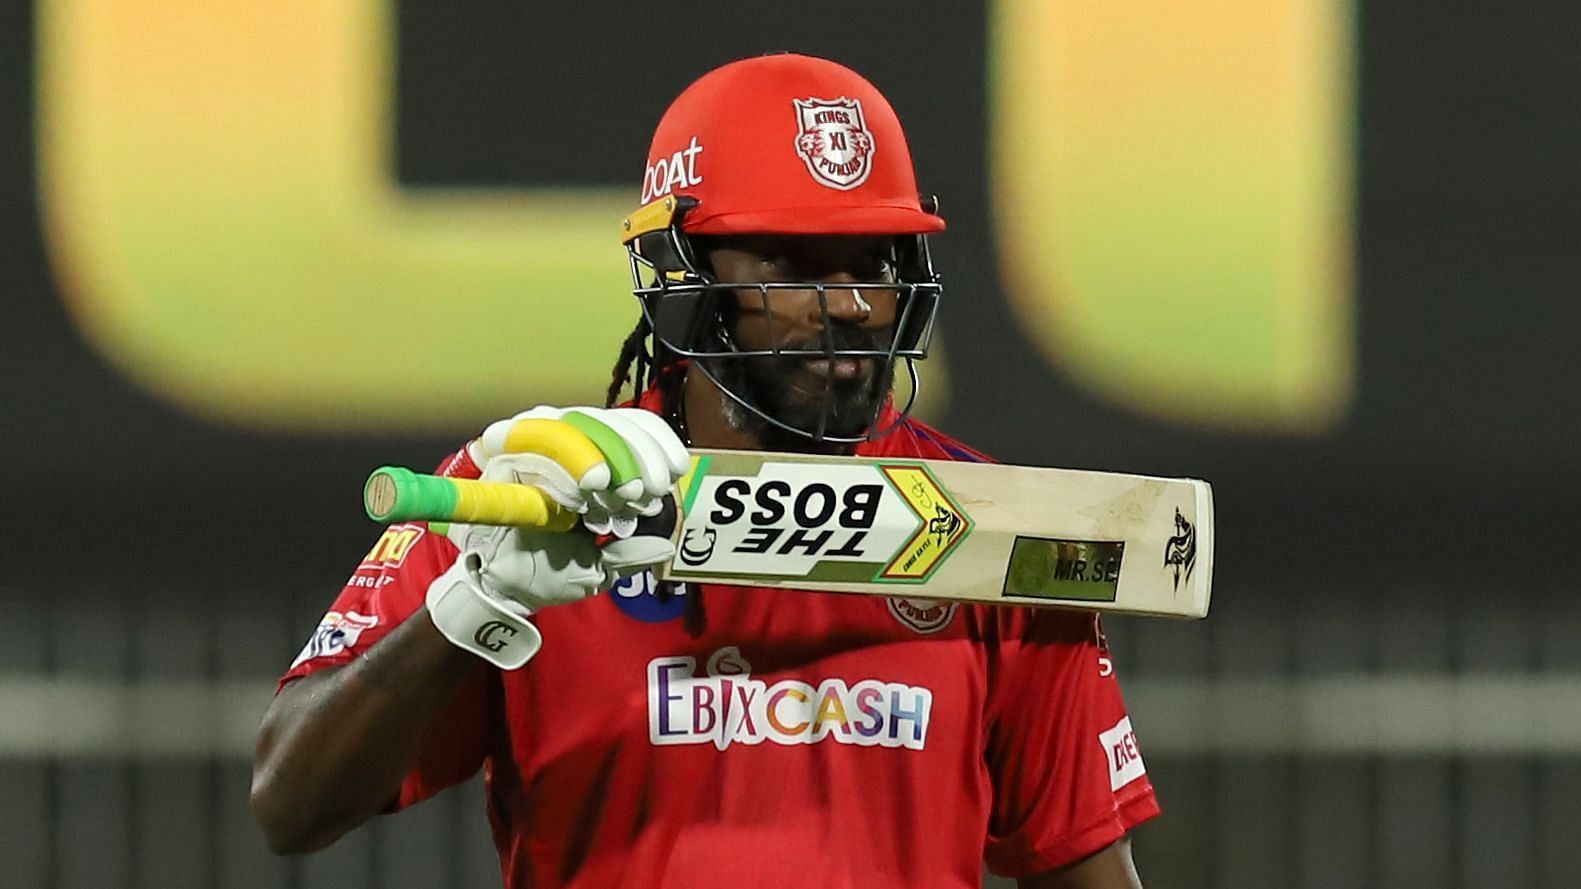 Chris Gayle finds himself in a spot of bother ahead of the 2022 IPL auction given his age and poor run with the bat